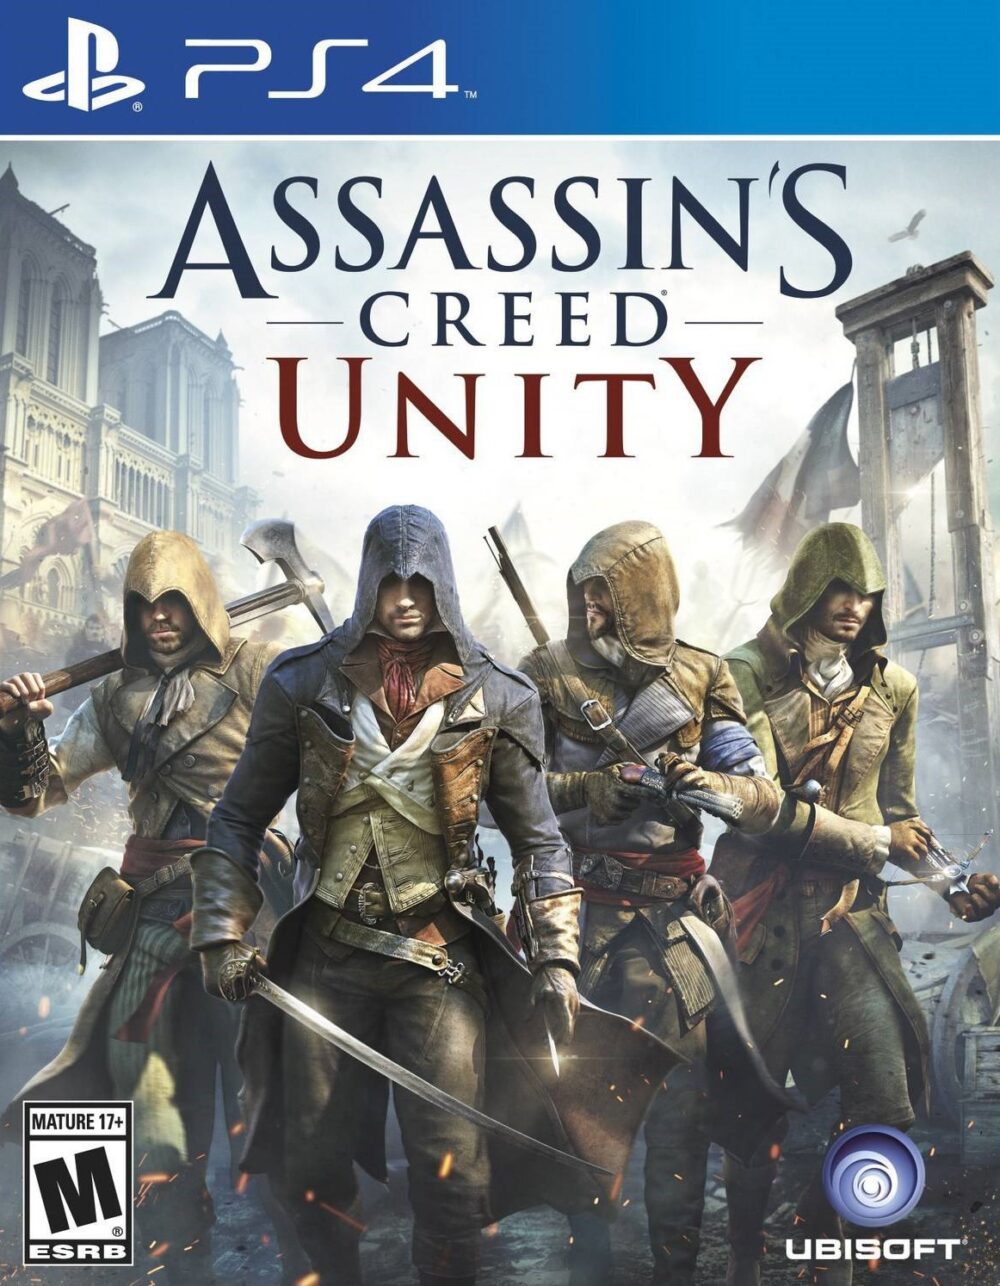 Assassin's Creed Unity for PS4